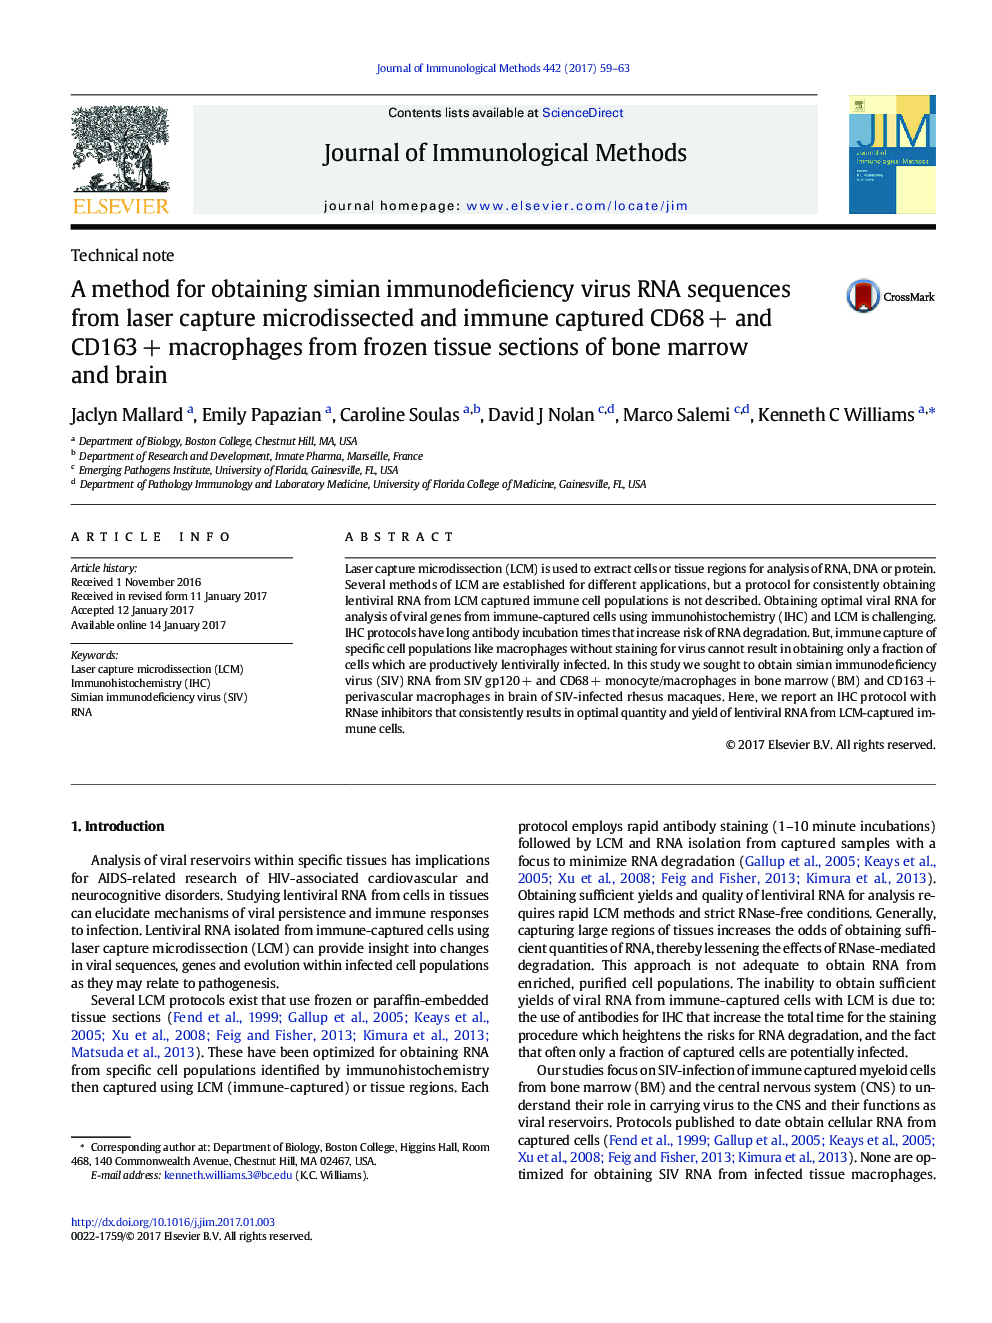 Technical noteA method for obtaining simian immunodeficiency virus RNA sequences from laser capture microdissected and immune captured CD68Â + and CD163Â + macrophages from frozen tissue sections of bone marrow and brain